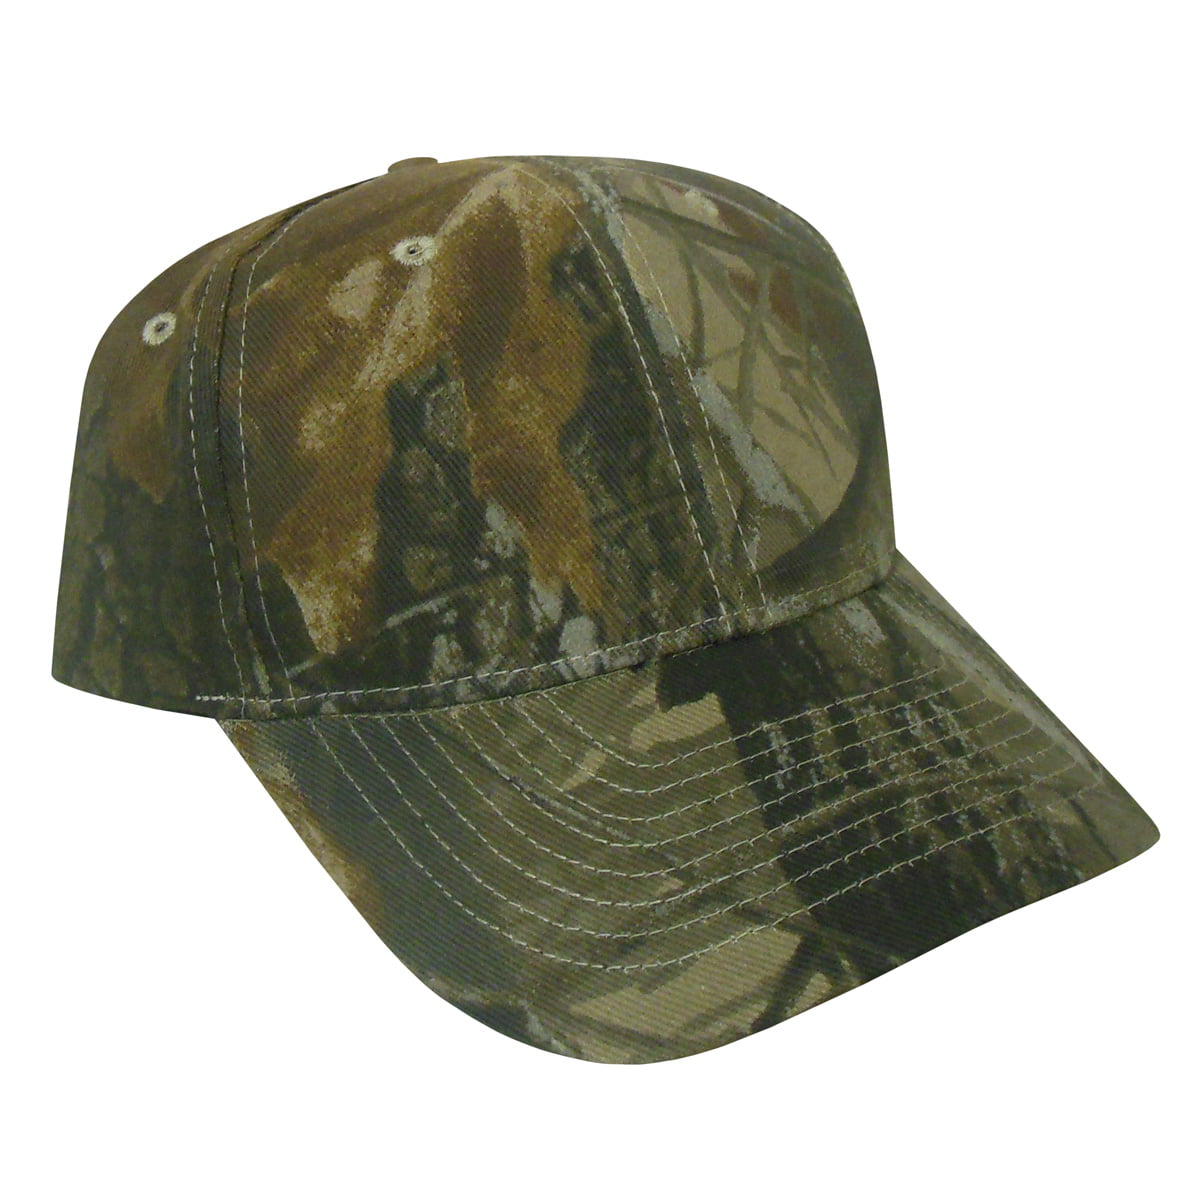 Realtree 30th Aniversery Limited Edition Camo Hunting Hat 